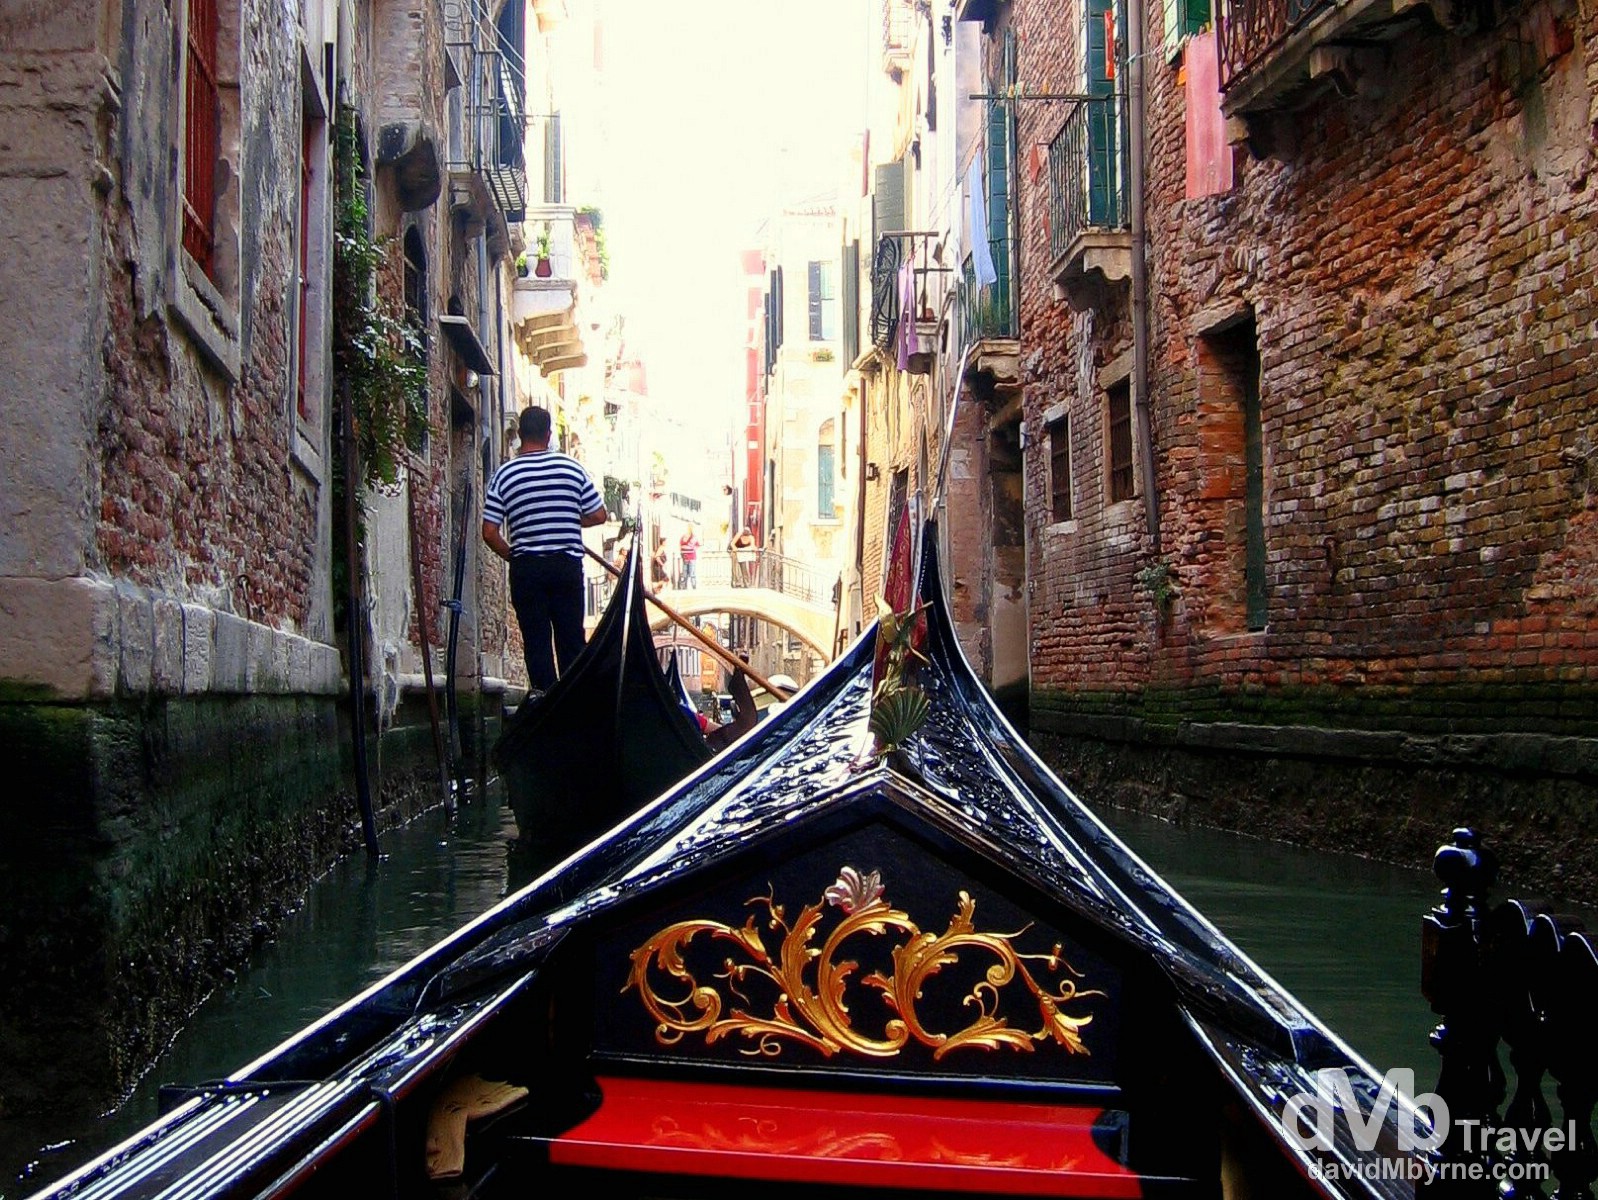 A gondola ride along the canals of Venice, Veneto, Italy. August 27th, 2007.